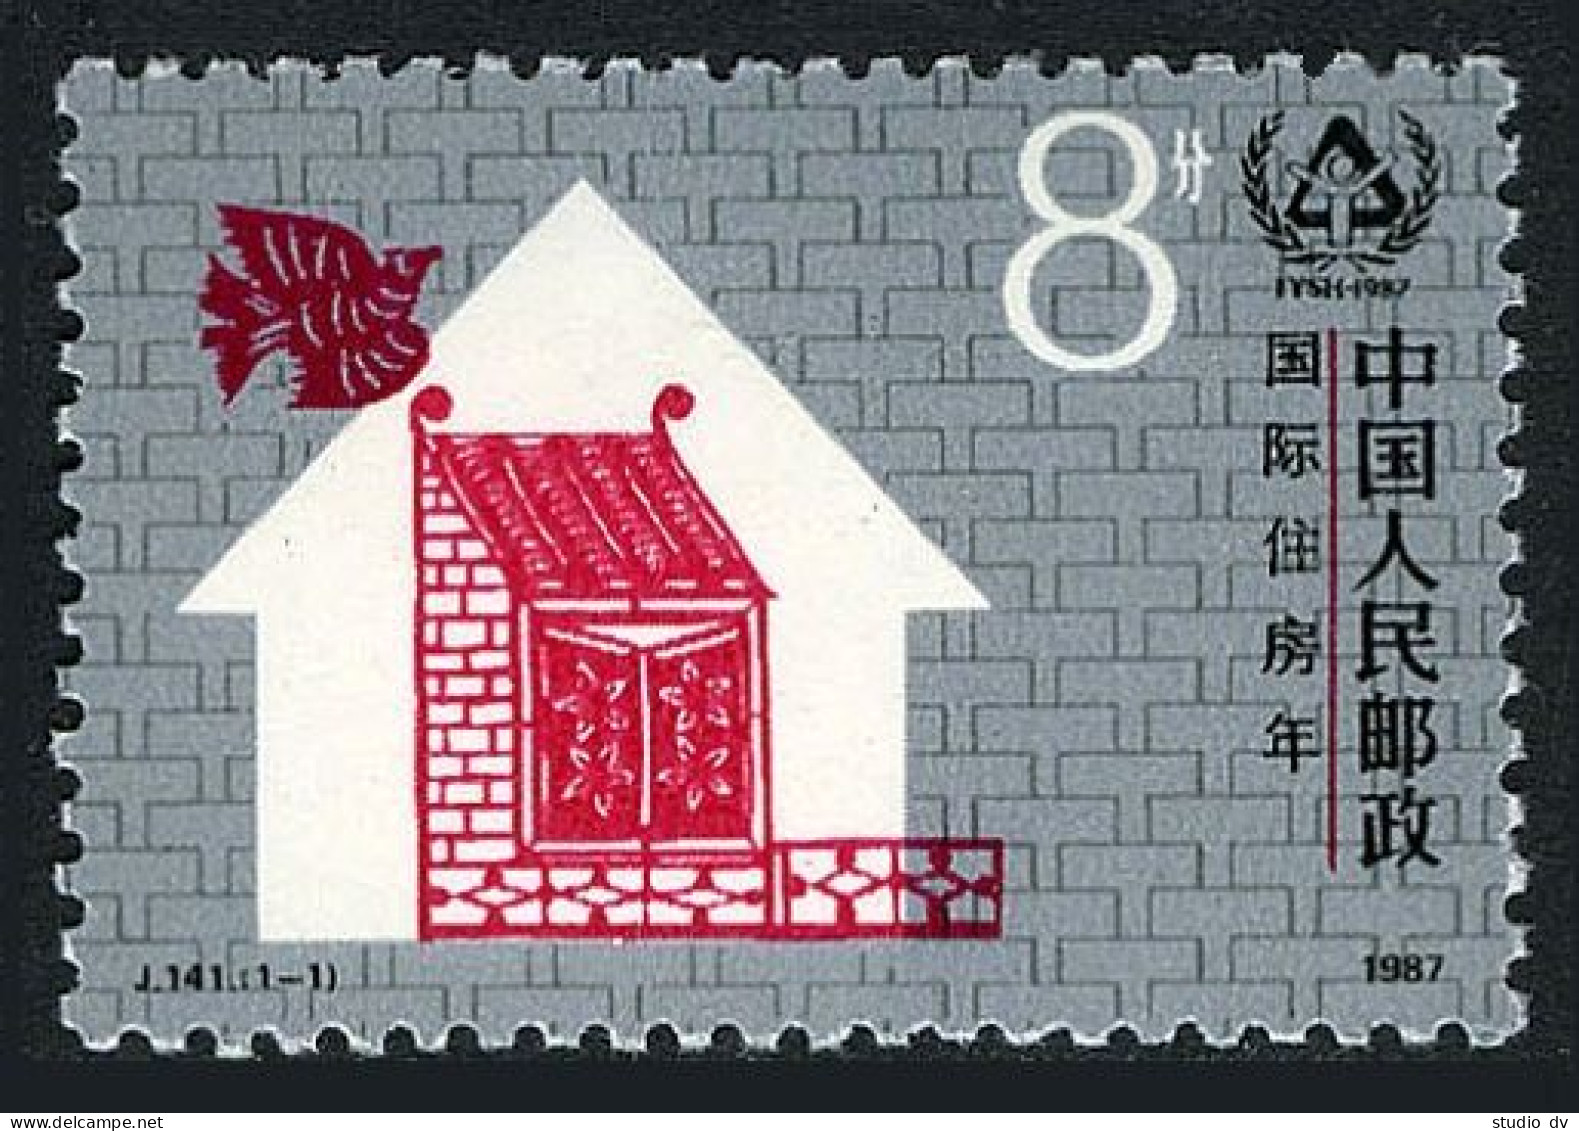 China PRC 2108, MNH. Michel 2135. Year Of Shelter For The Homeless IYSH-1987. Bird. - Unused Stamps